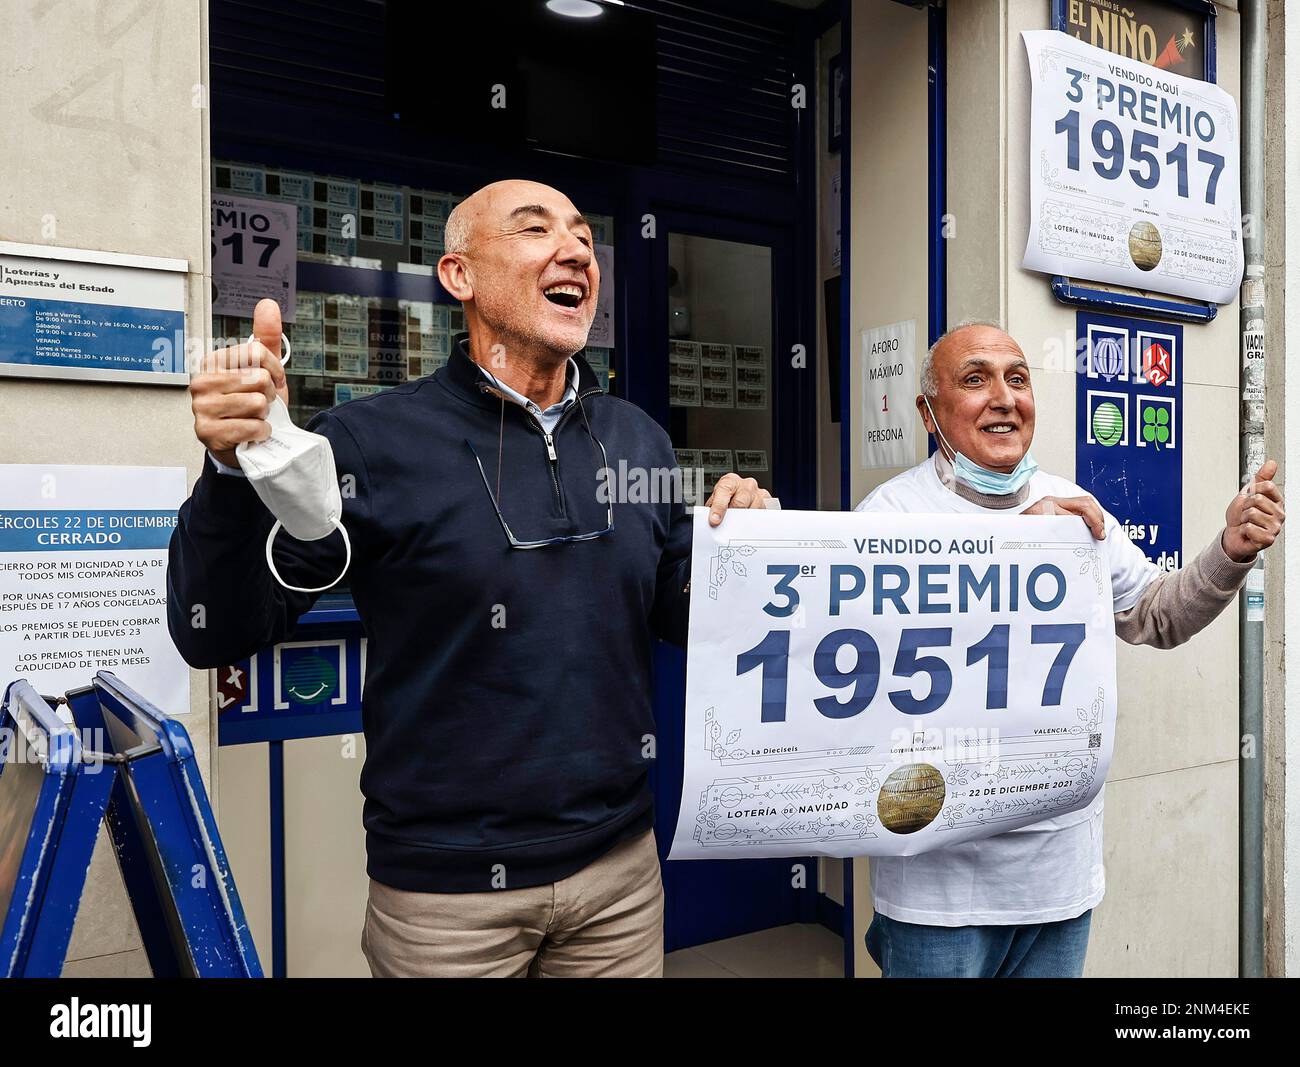 two-employees-of-the-administration-located-in-jativa-street-in-valencia-celebrate-that-they-have-sold-part-of-the-number-19517-corresponding-to-the-second-prize-of-the-extraordinary-draw-of-the-christmas-lottery-december-22-2021-in-valencia-valencian-community-spain-this-years-draw-has-distributed-2021-a-total-of-2408-million-euros-in-prizes-the-same-amount-as-the-previous-year-among-the-prizes-distributed-by-the-christmas-lottery-highlights-the-popularly-known-as-gordo-christmas-the-first-prize-of-400000-euros-per-tenth-the-second-prize-is-125000-euros-per-tenth-22-december-2NM4EKE.jpg